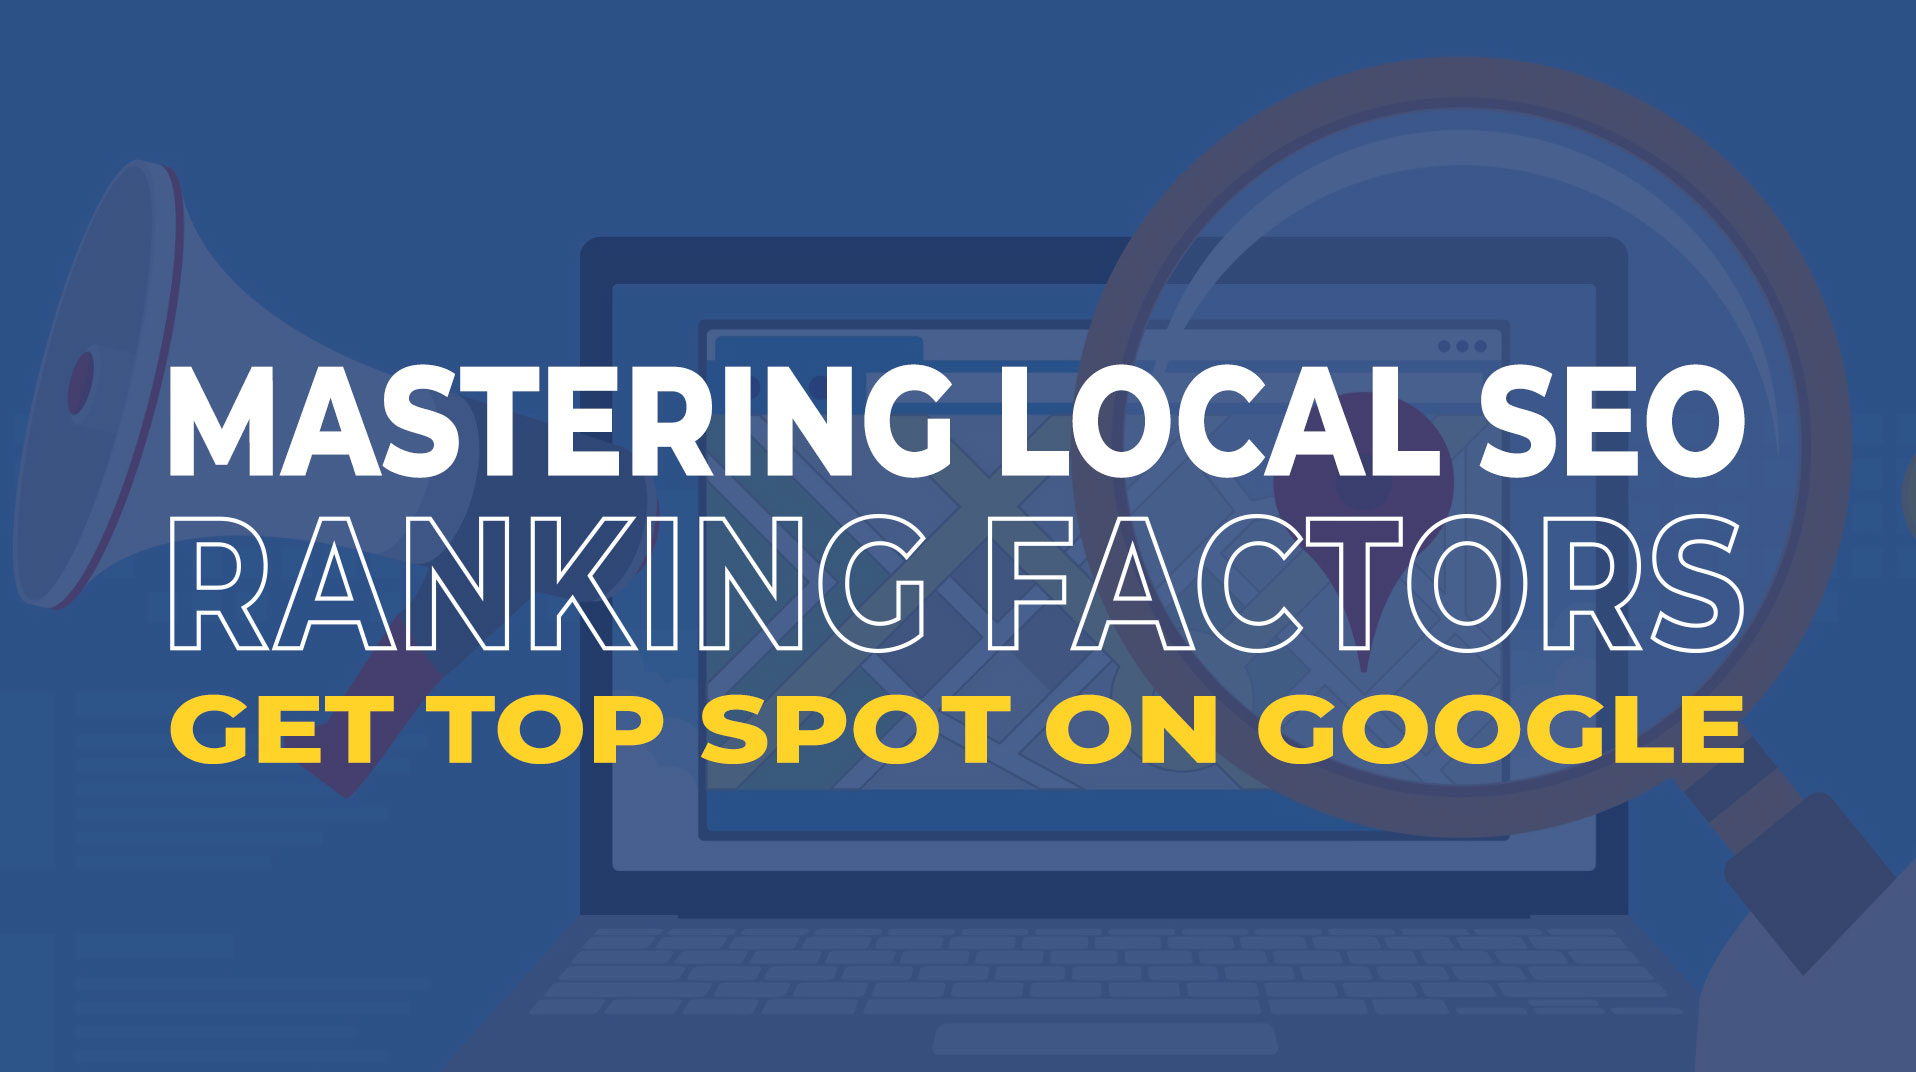 Mastering Local SEO: 3 Ranking Factors that will Help you Land the Top Spot on Google